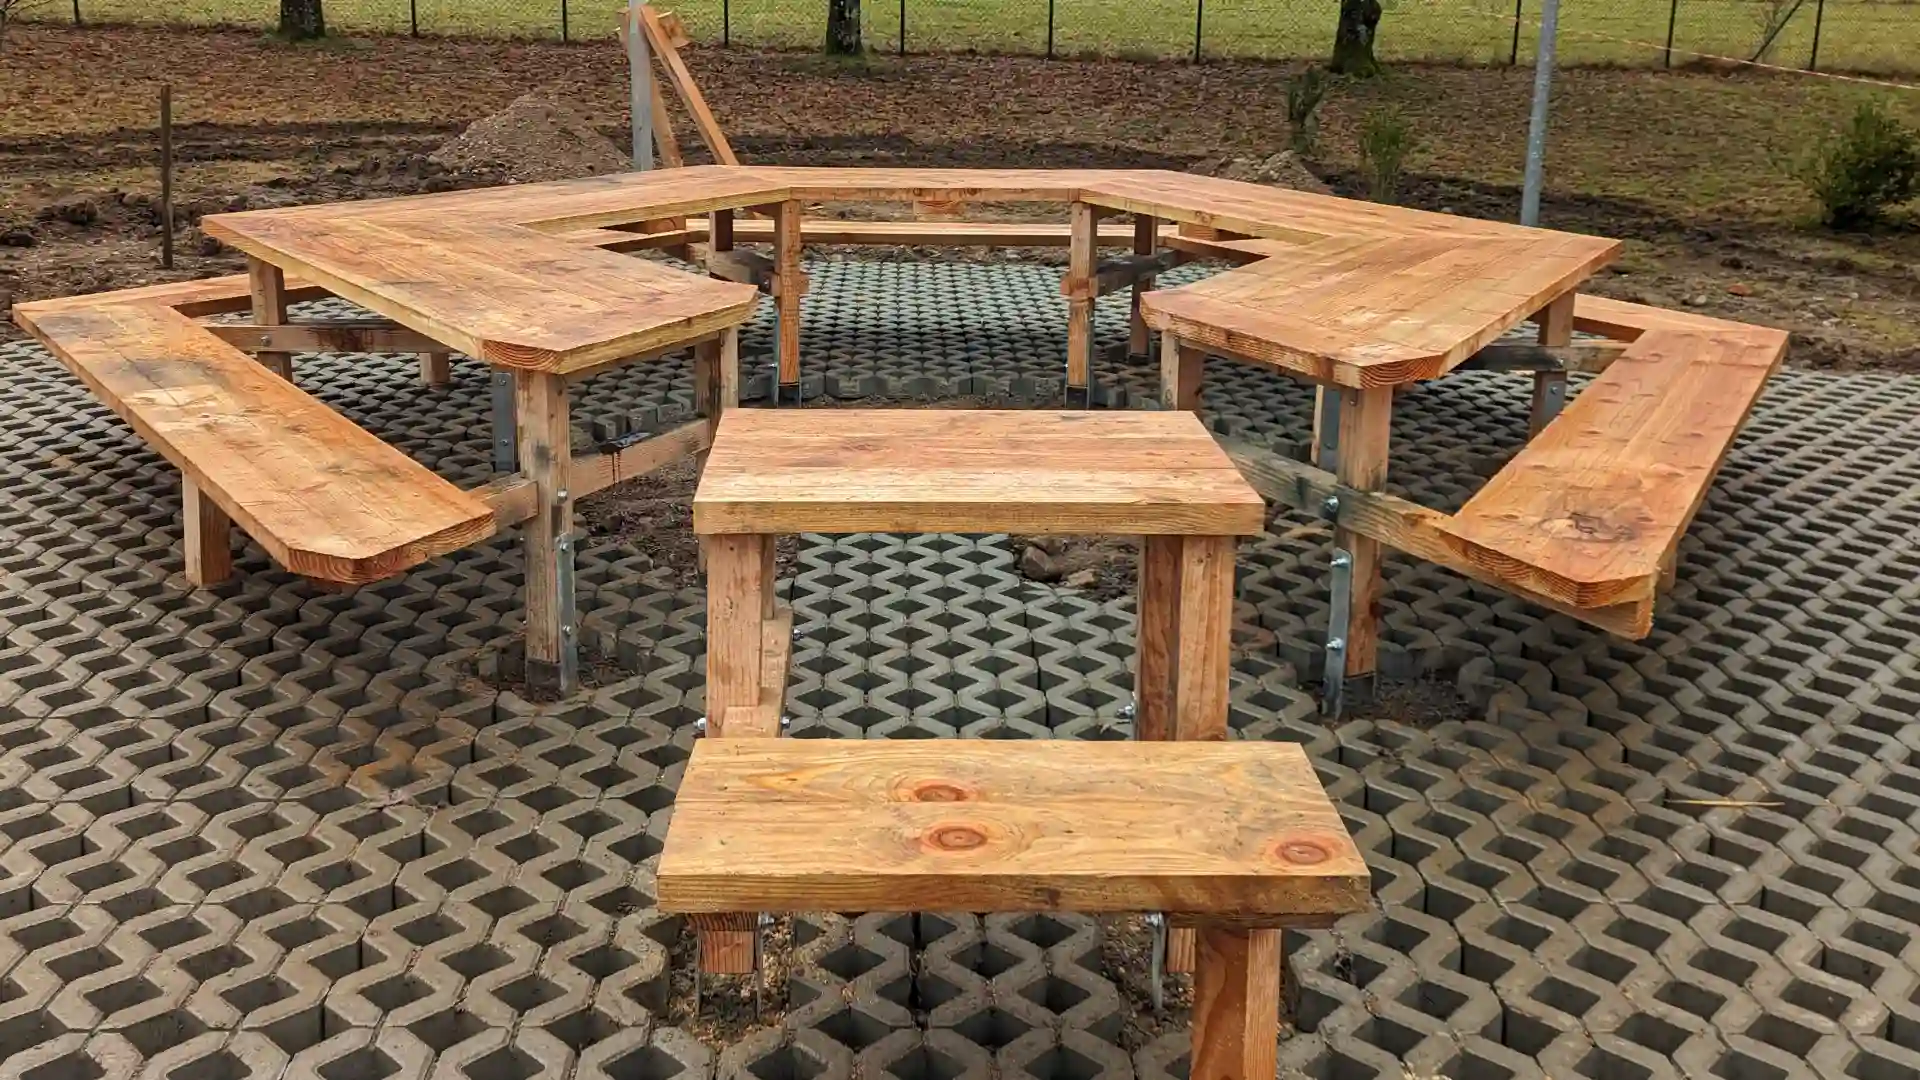 Custom octagonal wooden outdoor seating with interconnected benches on eco-friendly permeable paving, ideal for landscape design and communal spaces.